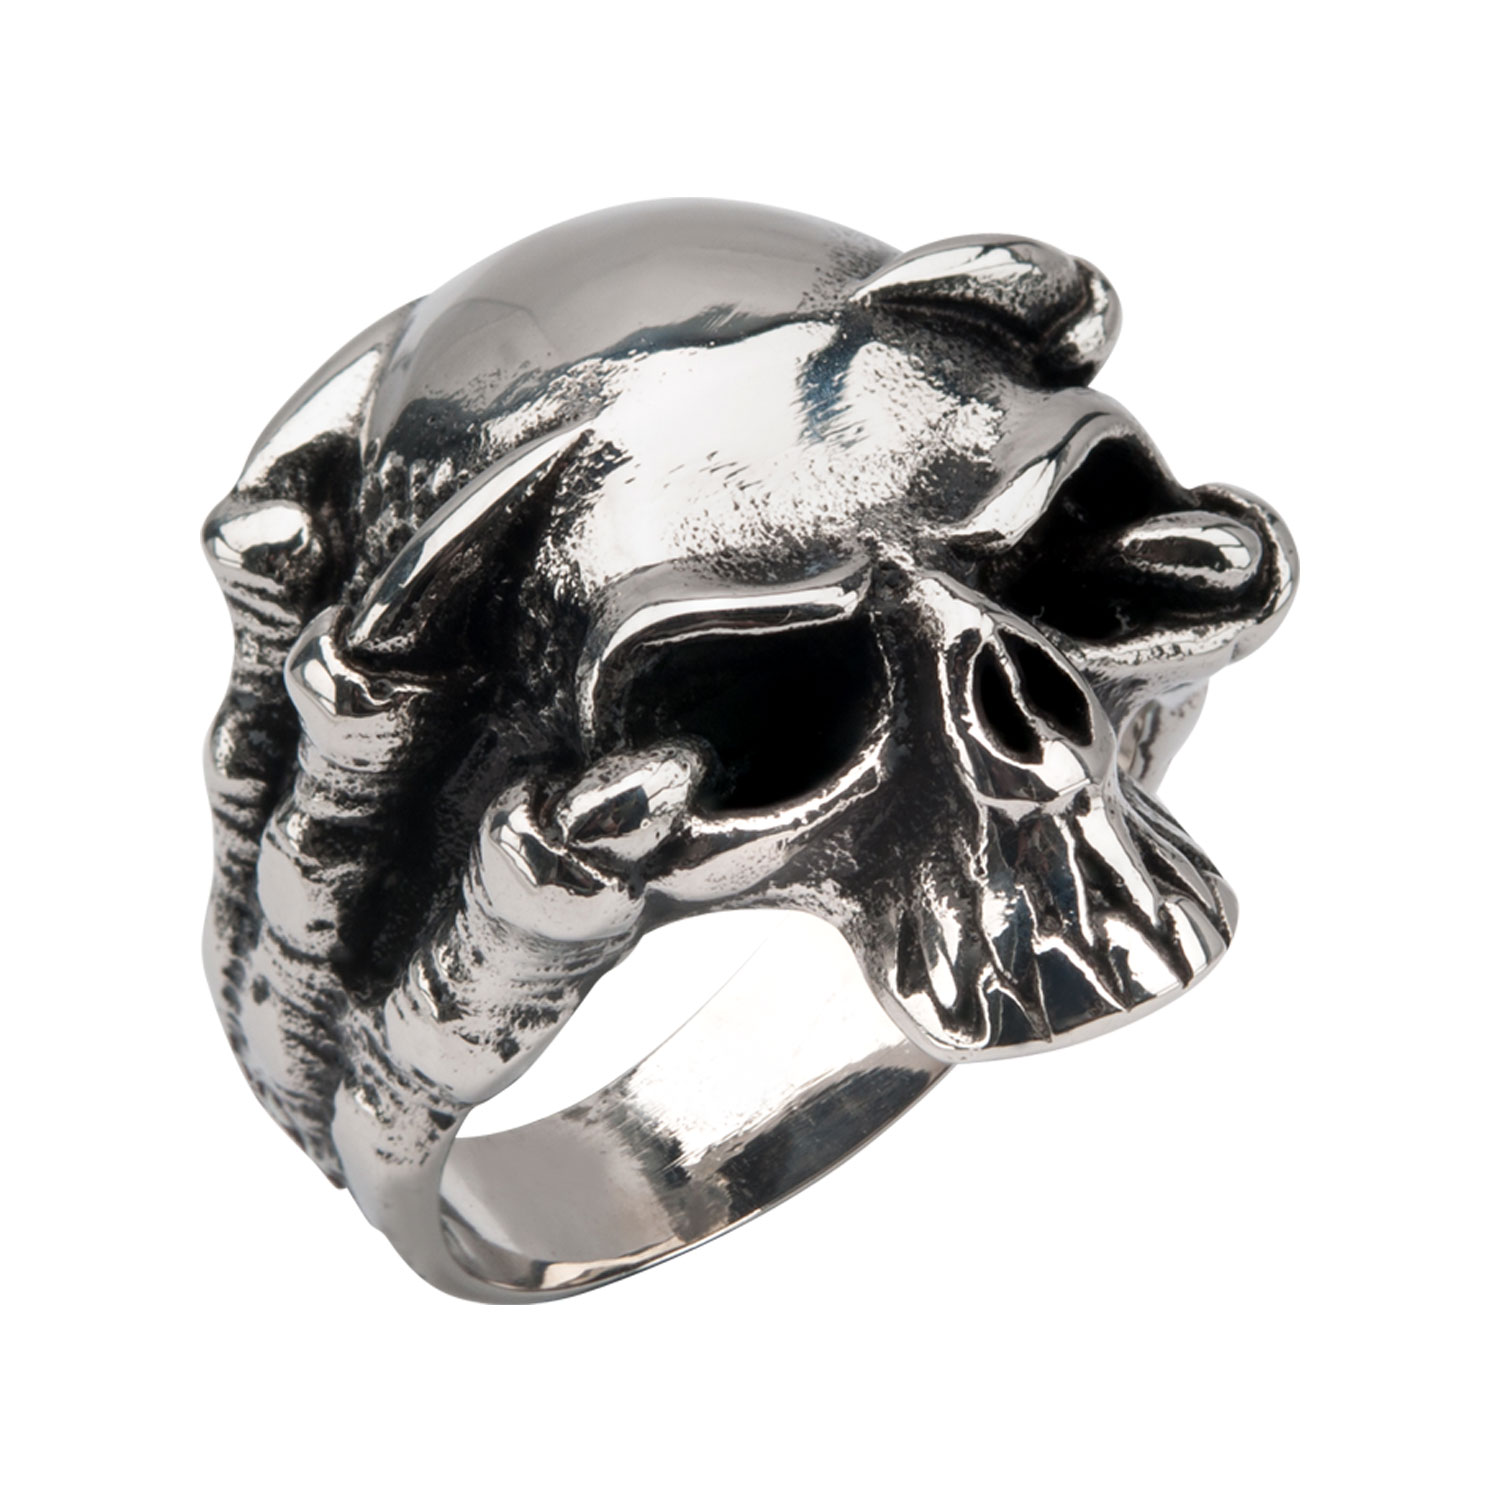 Black Oxidized Skull Ring with Claws Selman's Jewelers-Gemologist McComb, MS